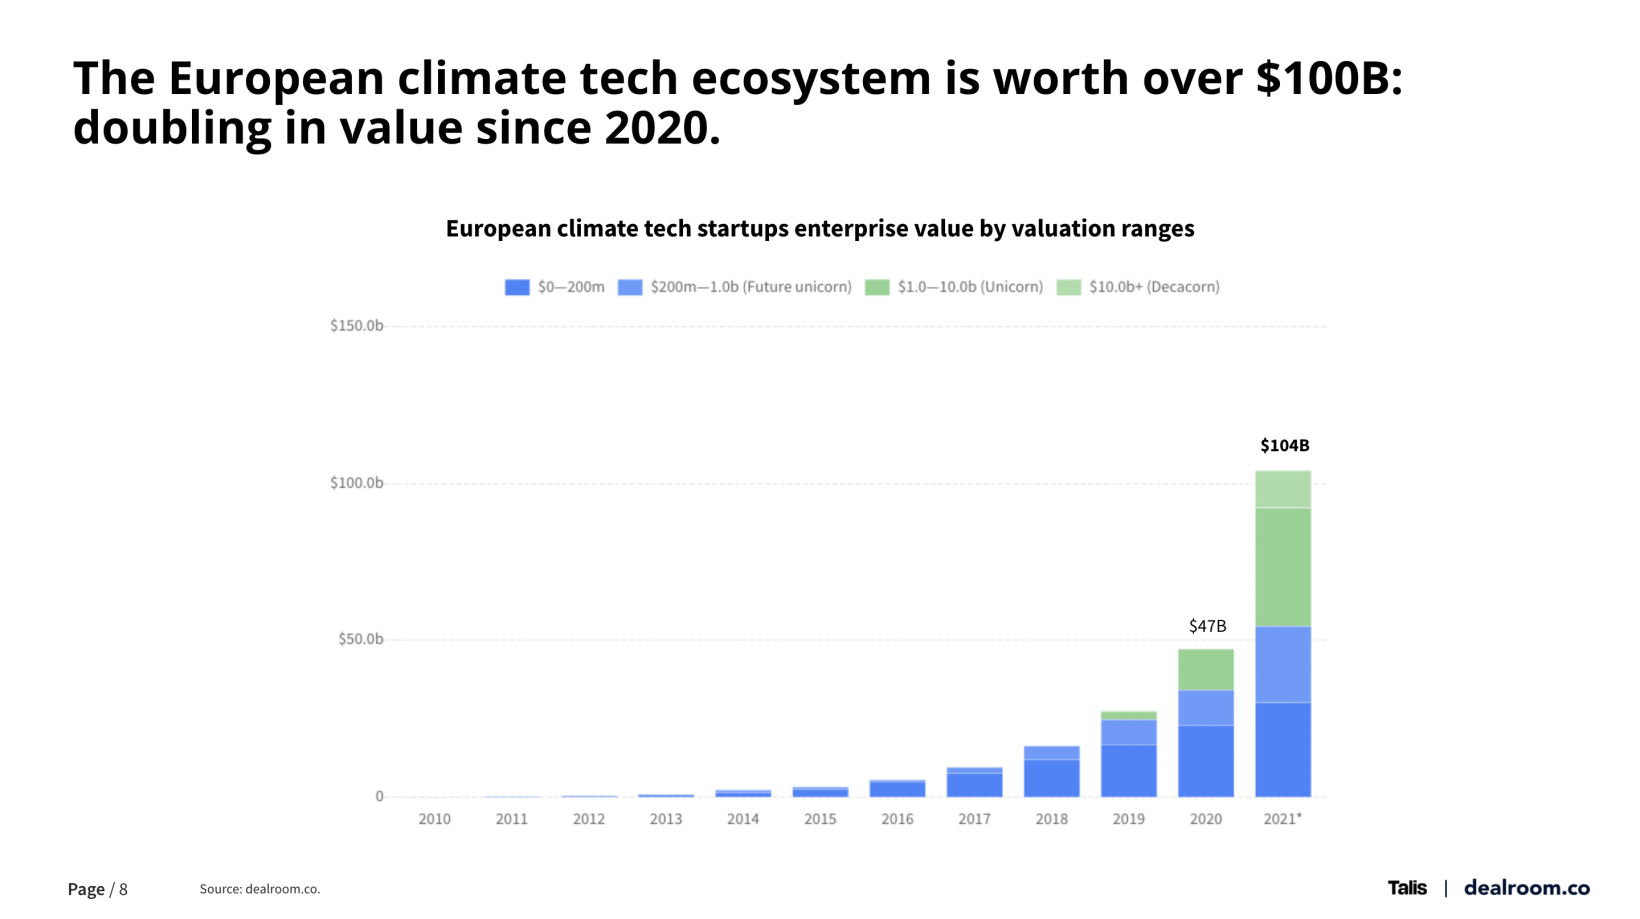 Chart showing the value of Europe's climate tech ecosystem in 2021